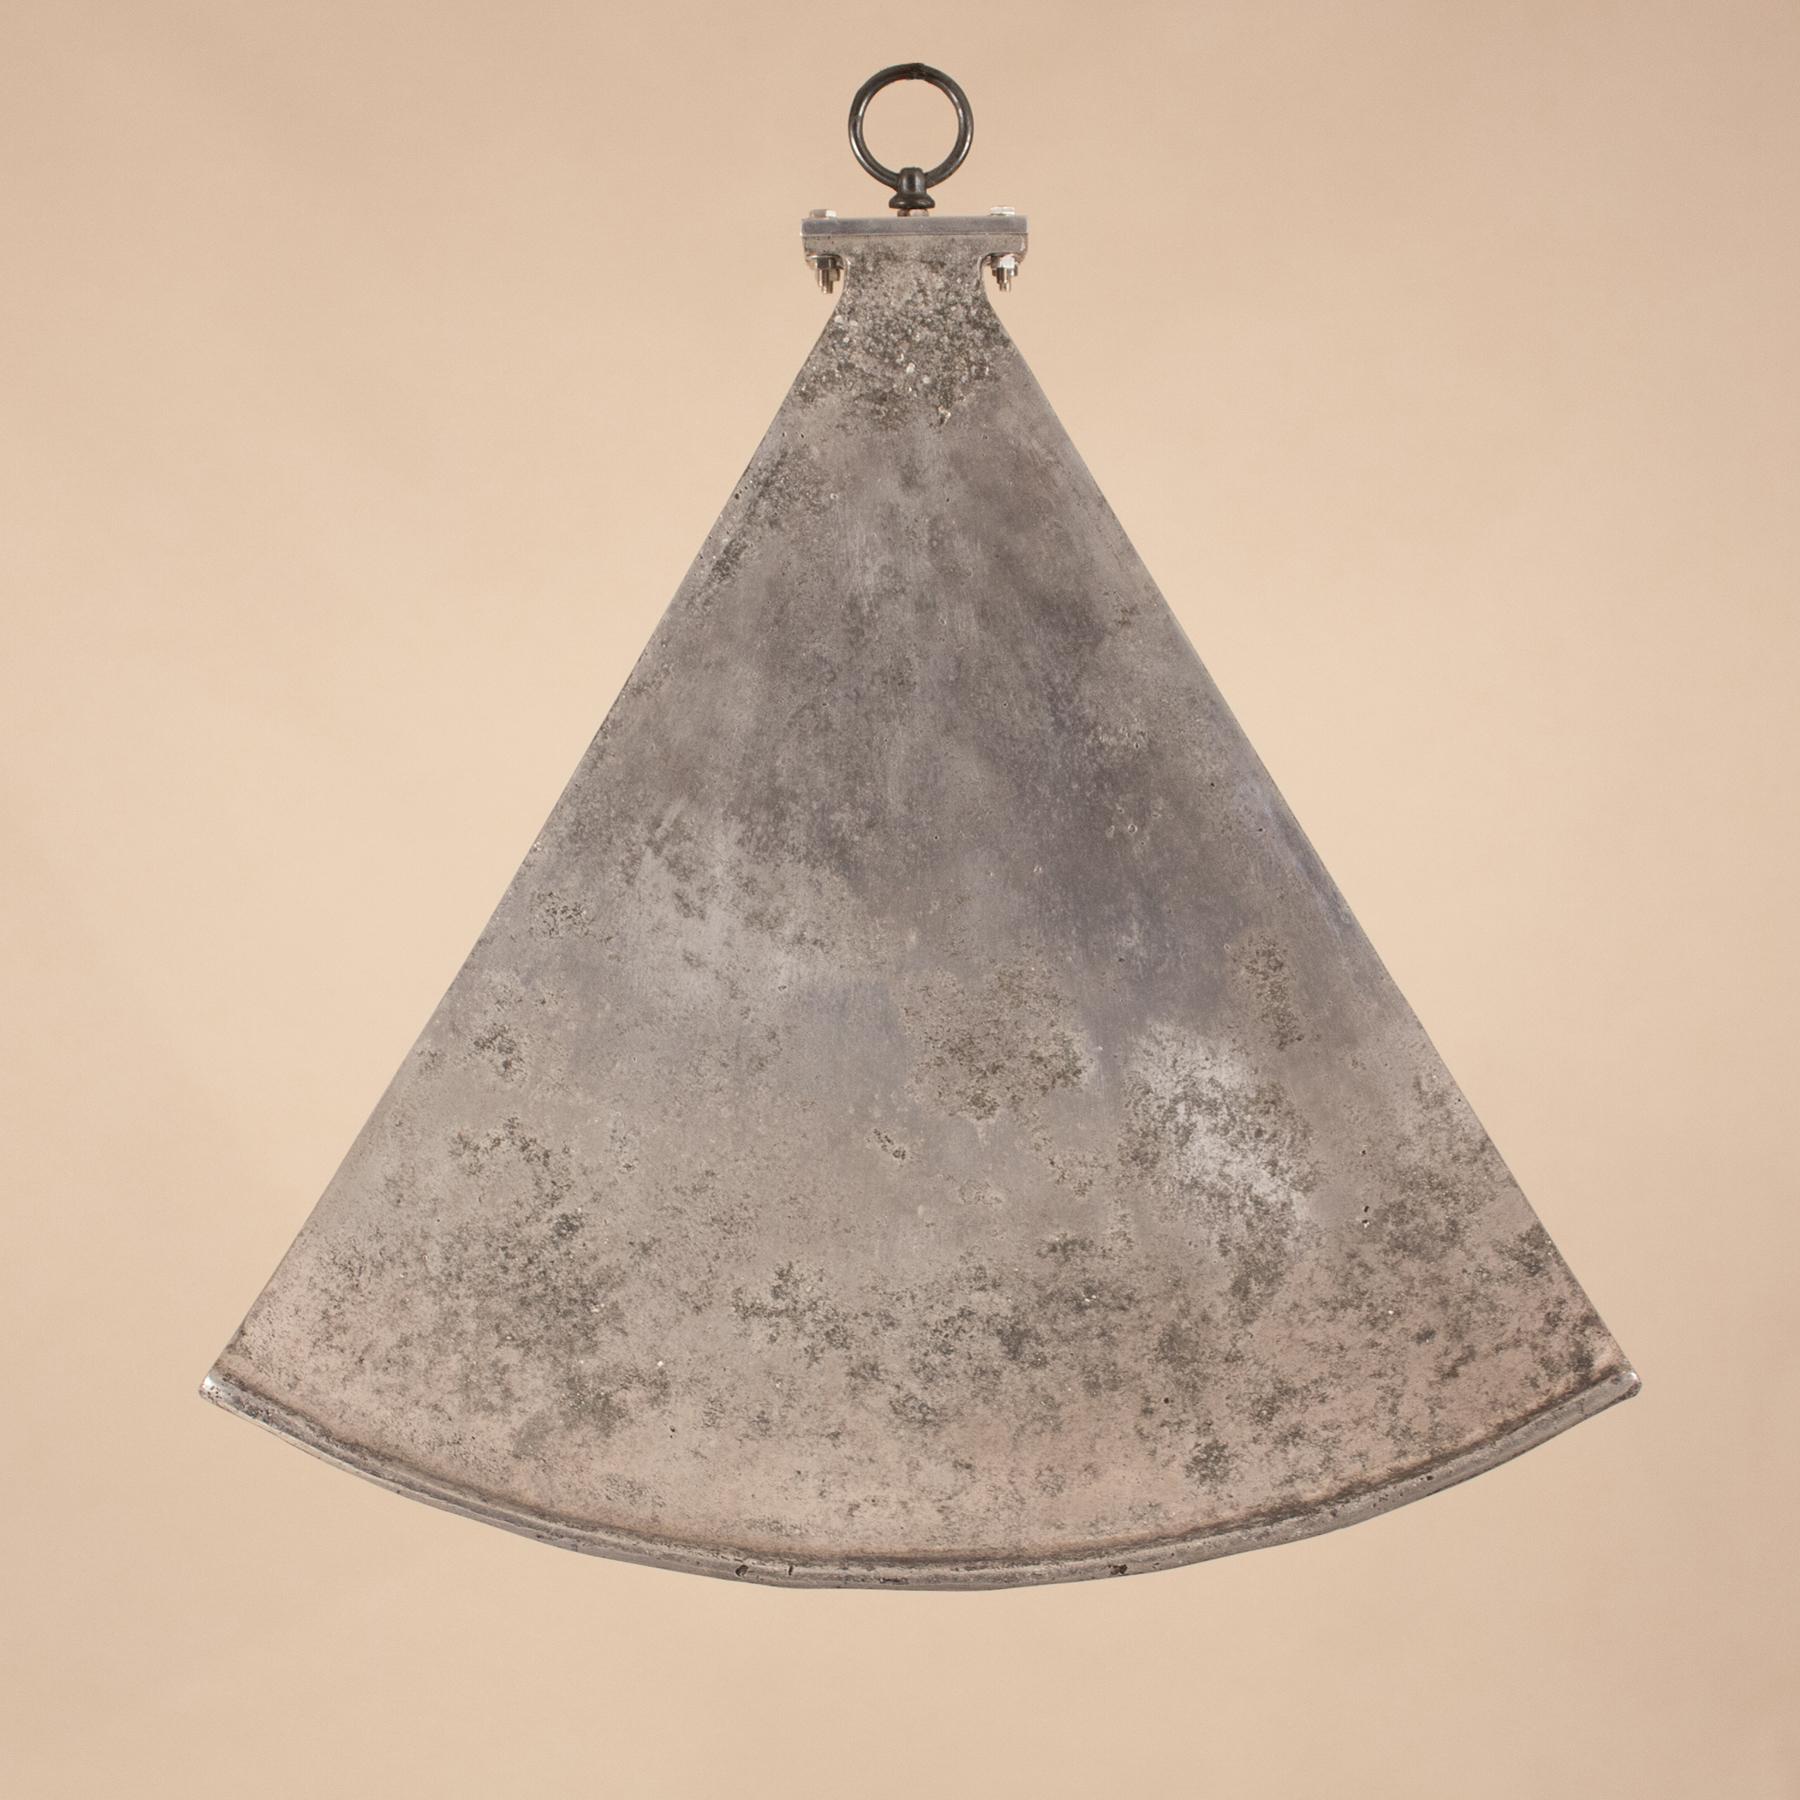 A circa 1950 Bombay movie theater horn loudspeaker finds new life as an industrial style pendant. This aluminum light has very appealing form and an authentic distressed patina. Manufactured by Ahuja Radio of India, the speaker is also available